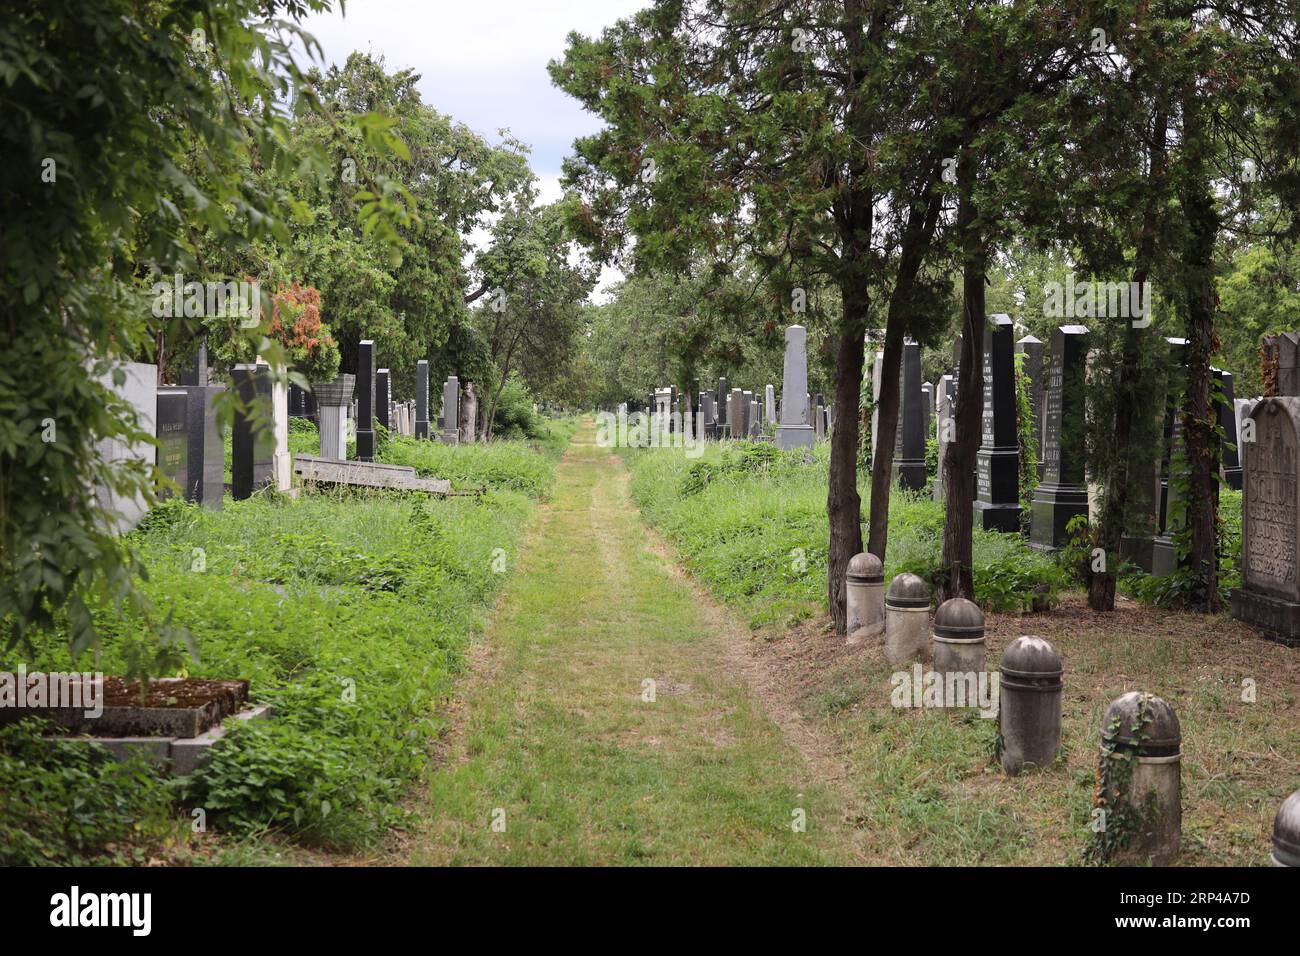 Alley of historic Jewish gravestones in the old Jewish cemetery of the Vienna Central Cemetery (Wiener Zentralfriedhof). The graves are overgrown with Stock Photo